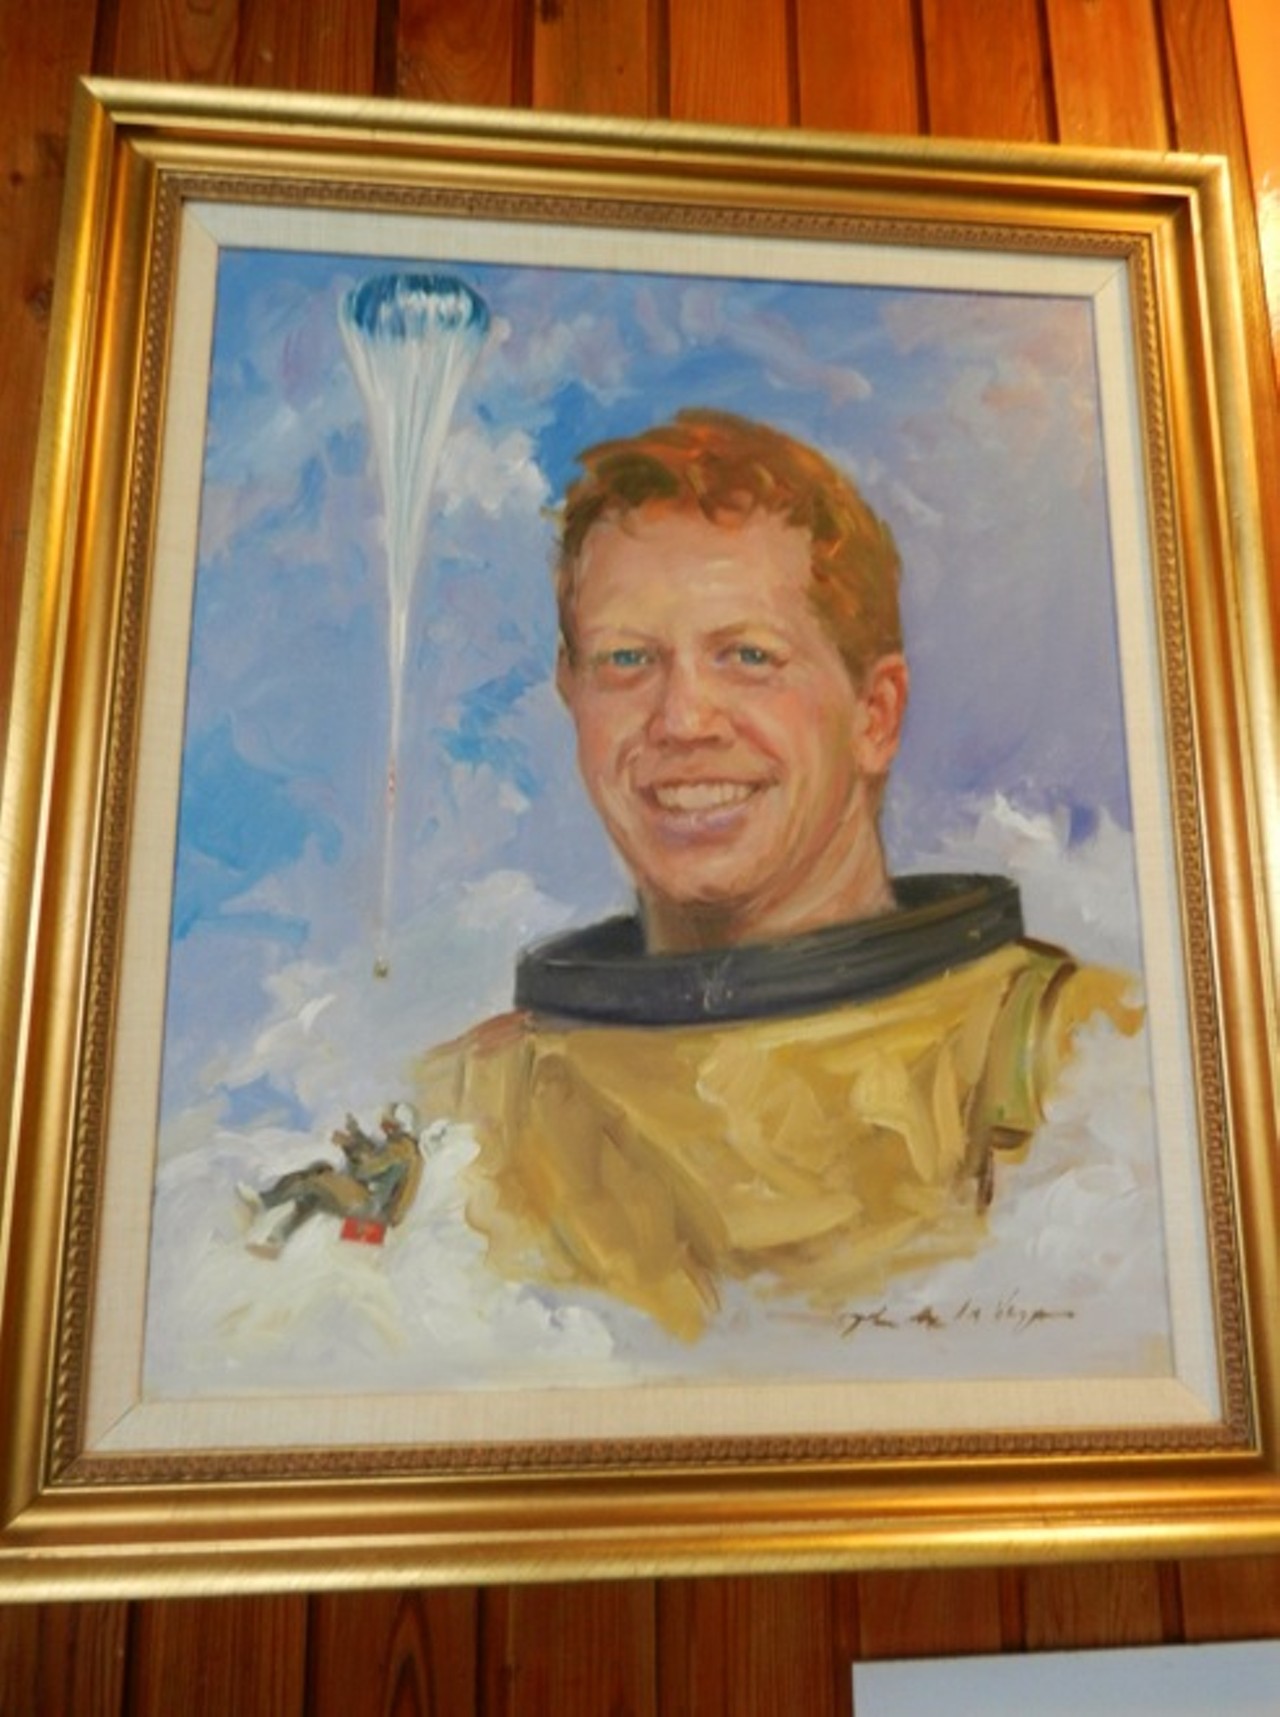 Orlando resident Col. Joe Kittinger was the first person to make a solo crossing of the Atlantic Ocean by gas balloon in 1978.
Photo via Flickr